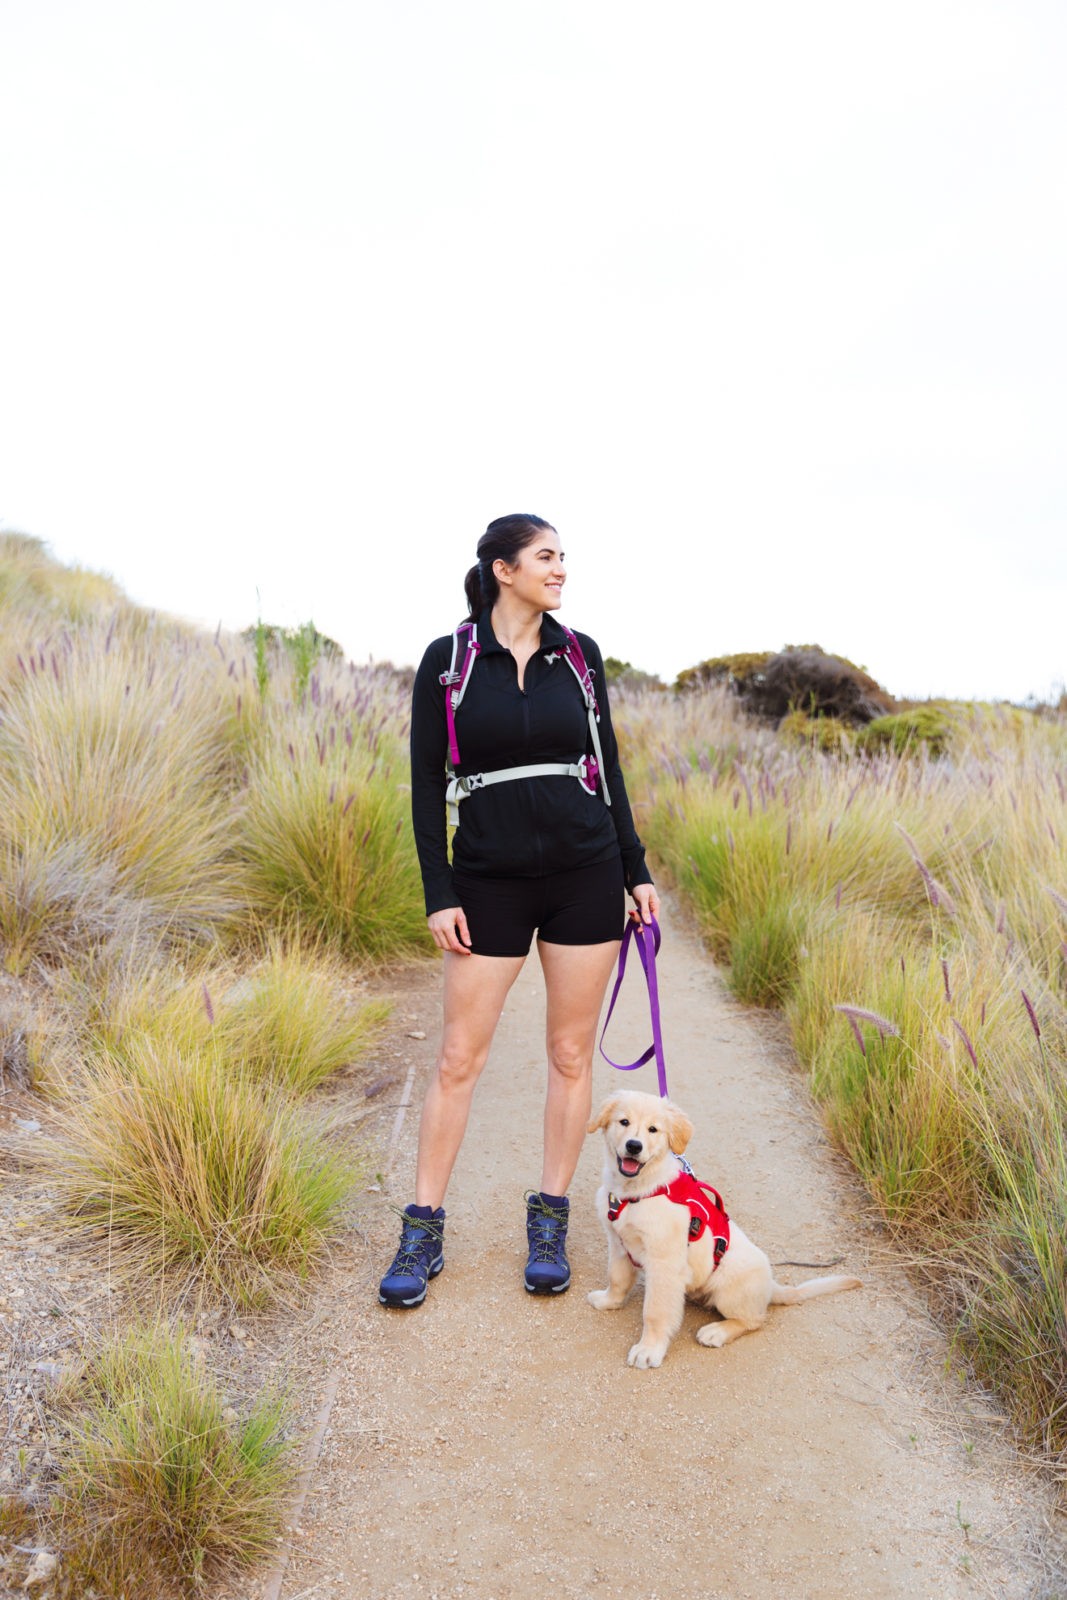 Hiking in Backcountry by Lifestyle Blogger Laura Lily, Salomon Hiking Boots, Osprey Hiking Backpack, Ruffwear Hiking Gear for Dogs,